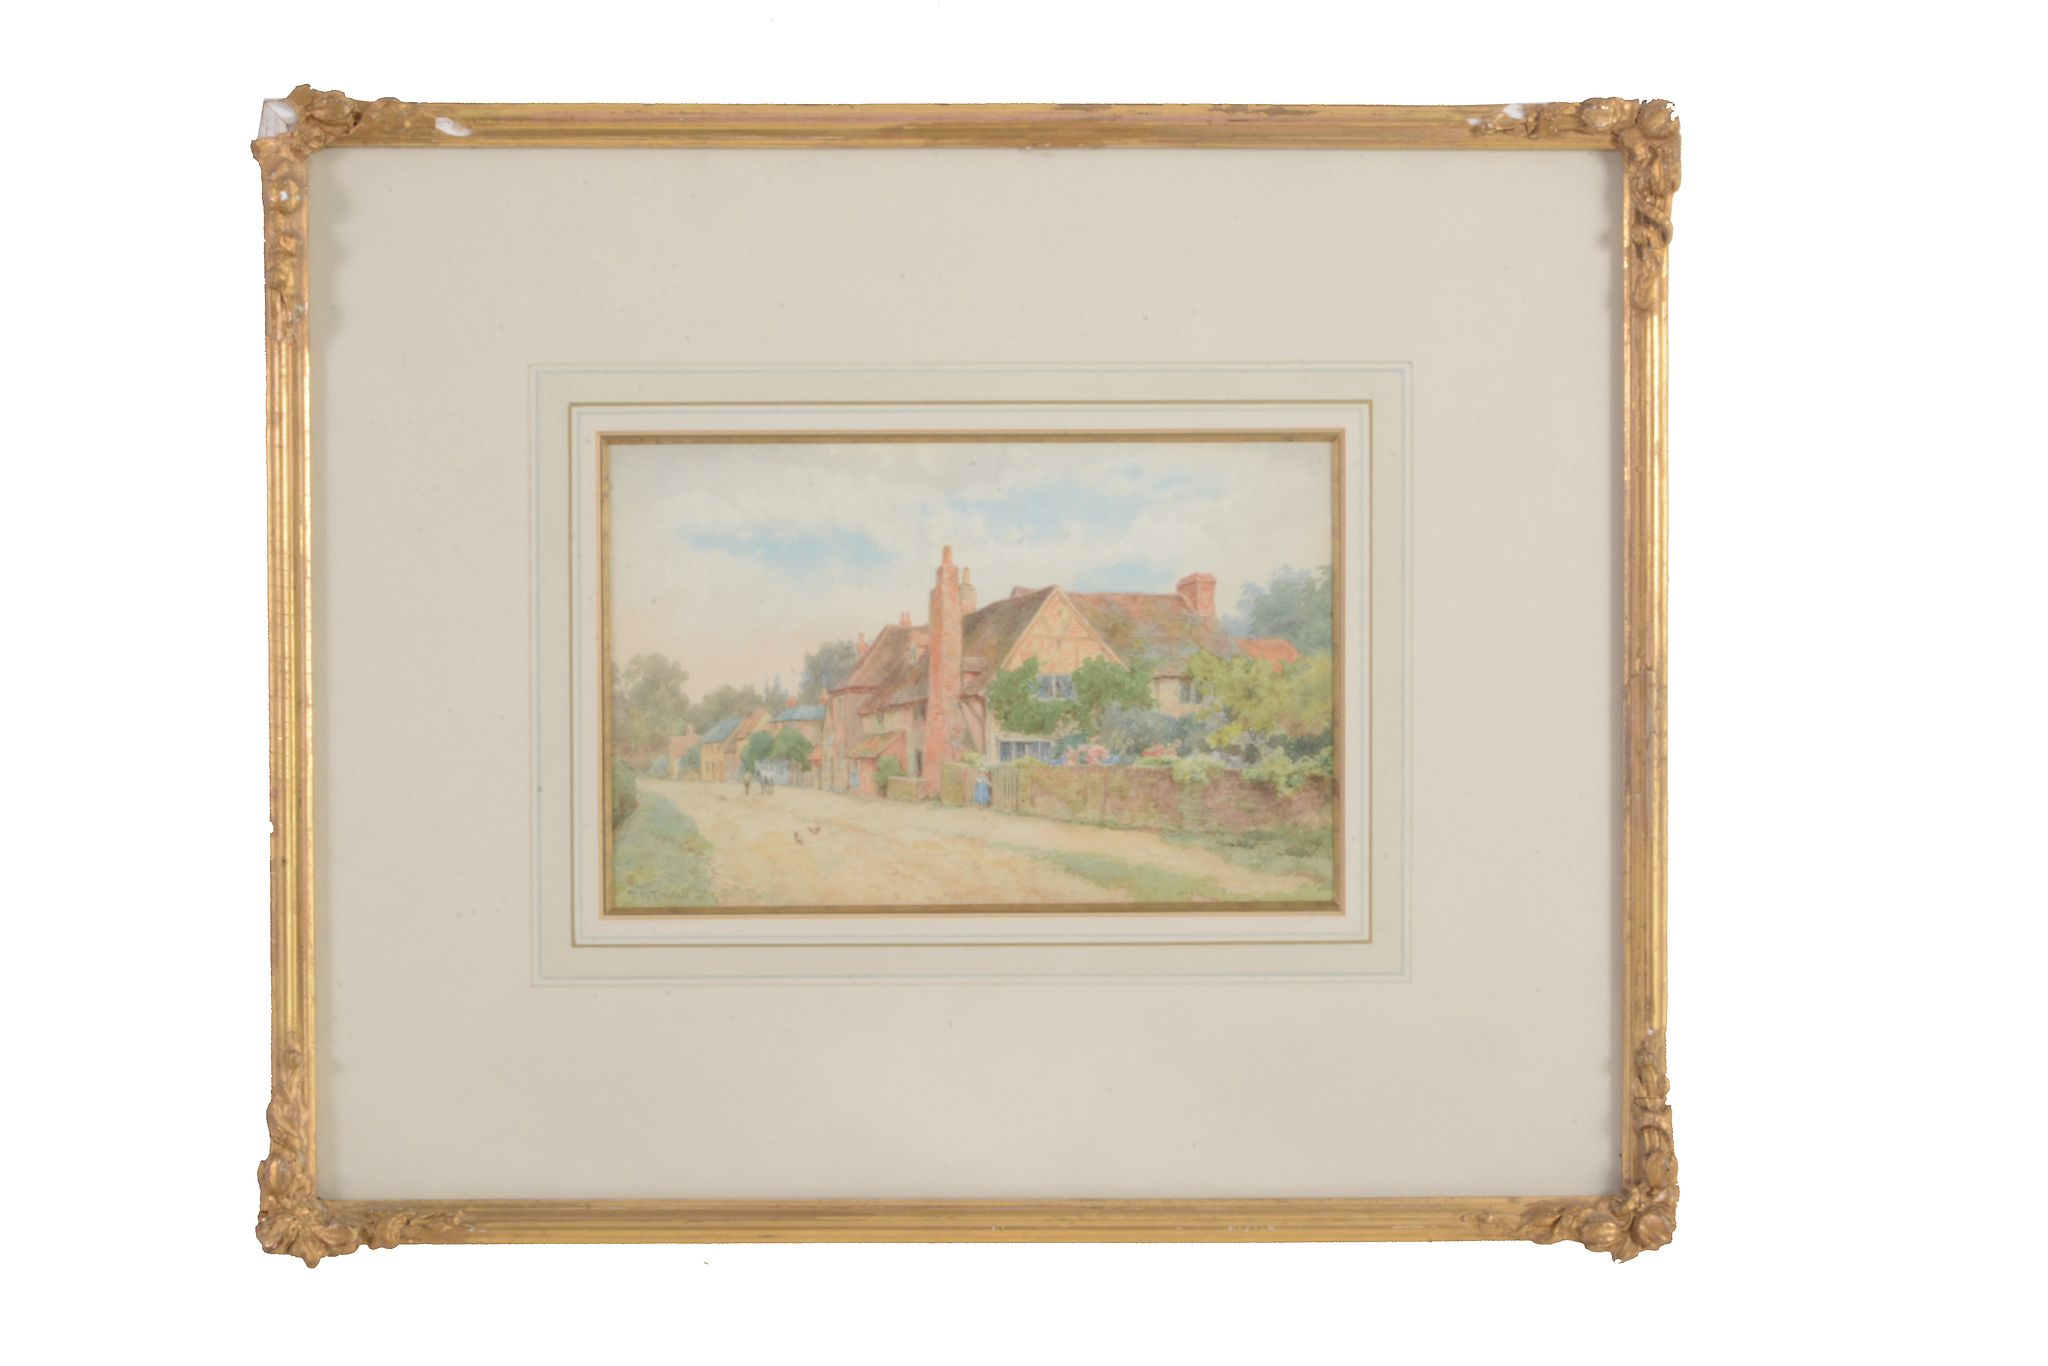 Thomas Nicholson Tyndale (1860-1930) - Melton's cottage, Chalfont St. Giles  Watercolour Signed - Image 2 of 3